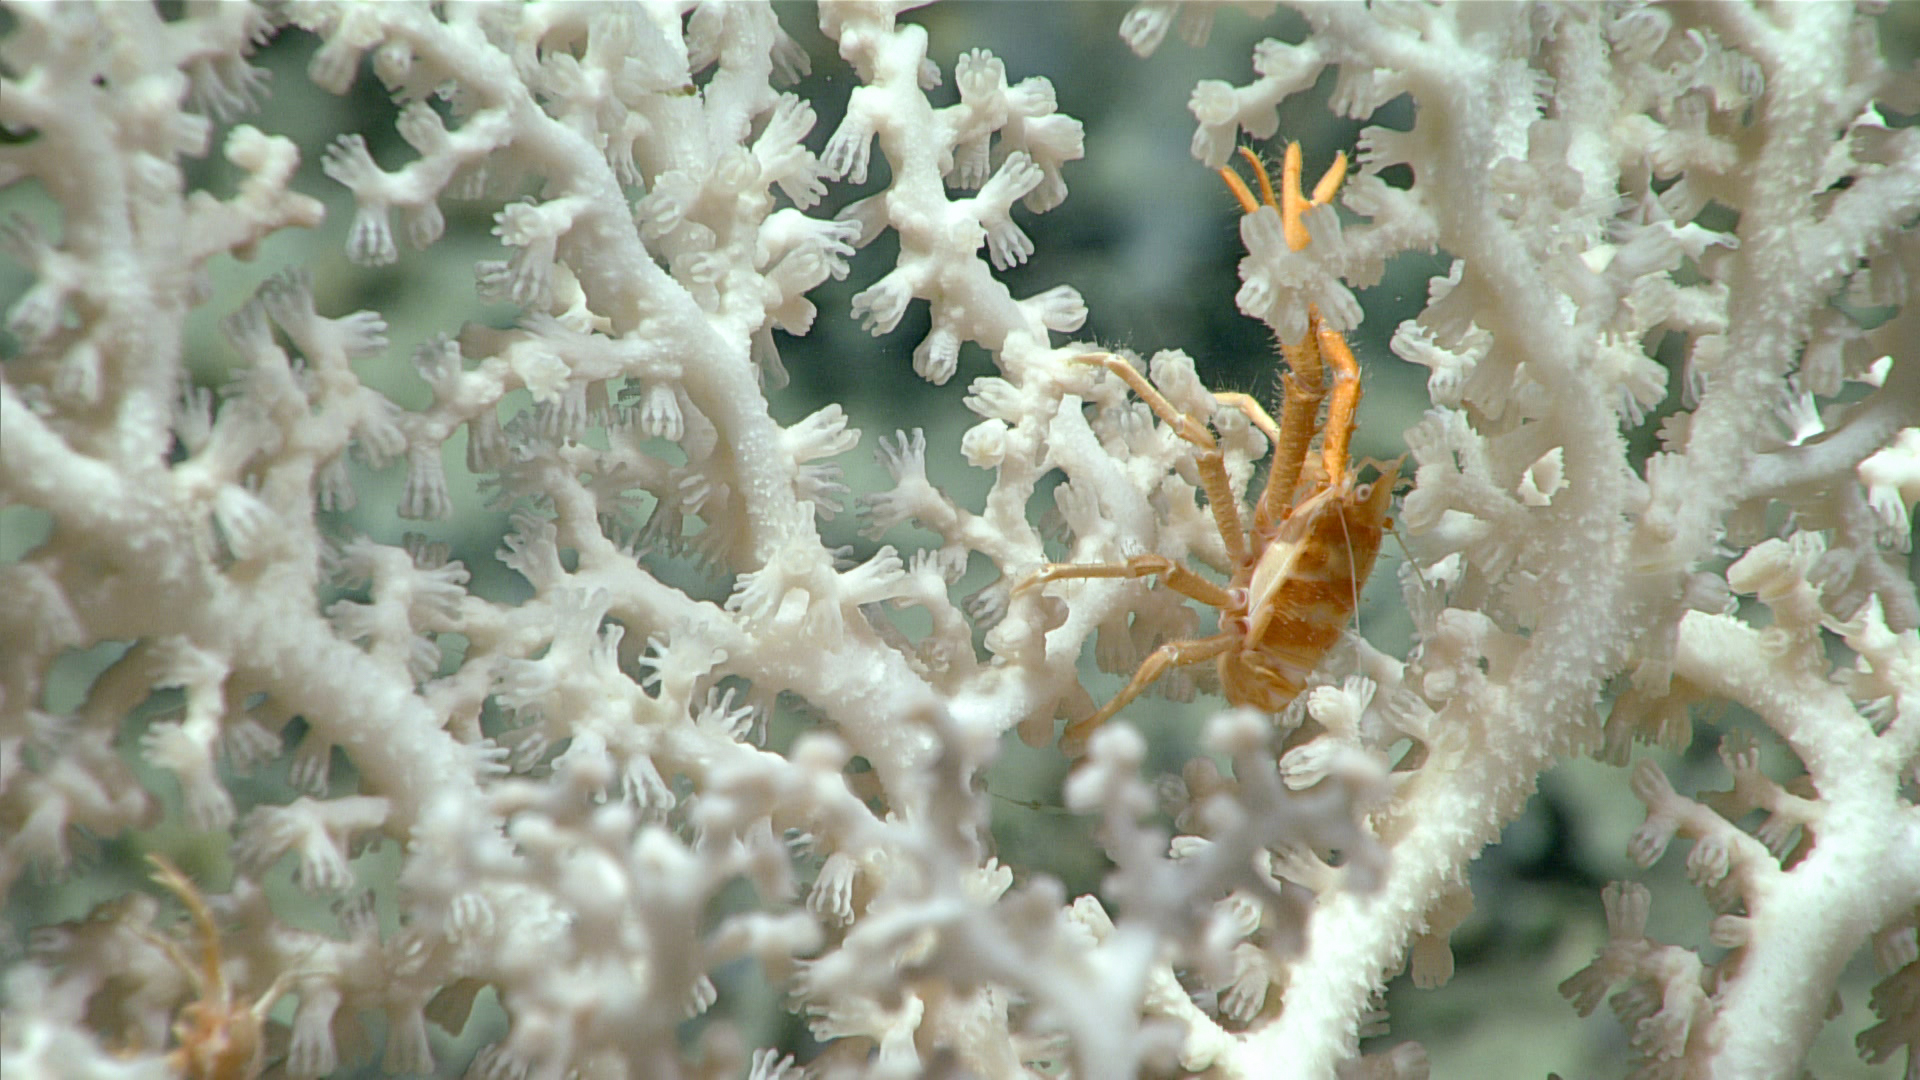 This intricate and robust octocoral (Corallidae) was seen on a largely sparse seafloor during Dive 12 of the 2019 Southeastern U.S. Deep-sea Exploration. Credit: NOAA Ocean Exploration